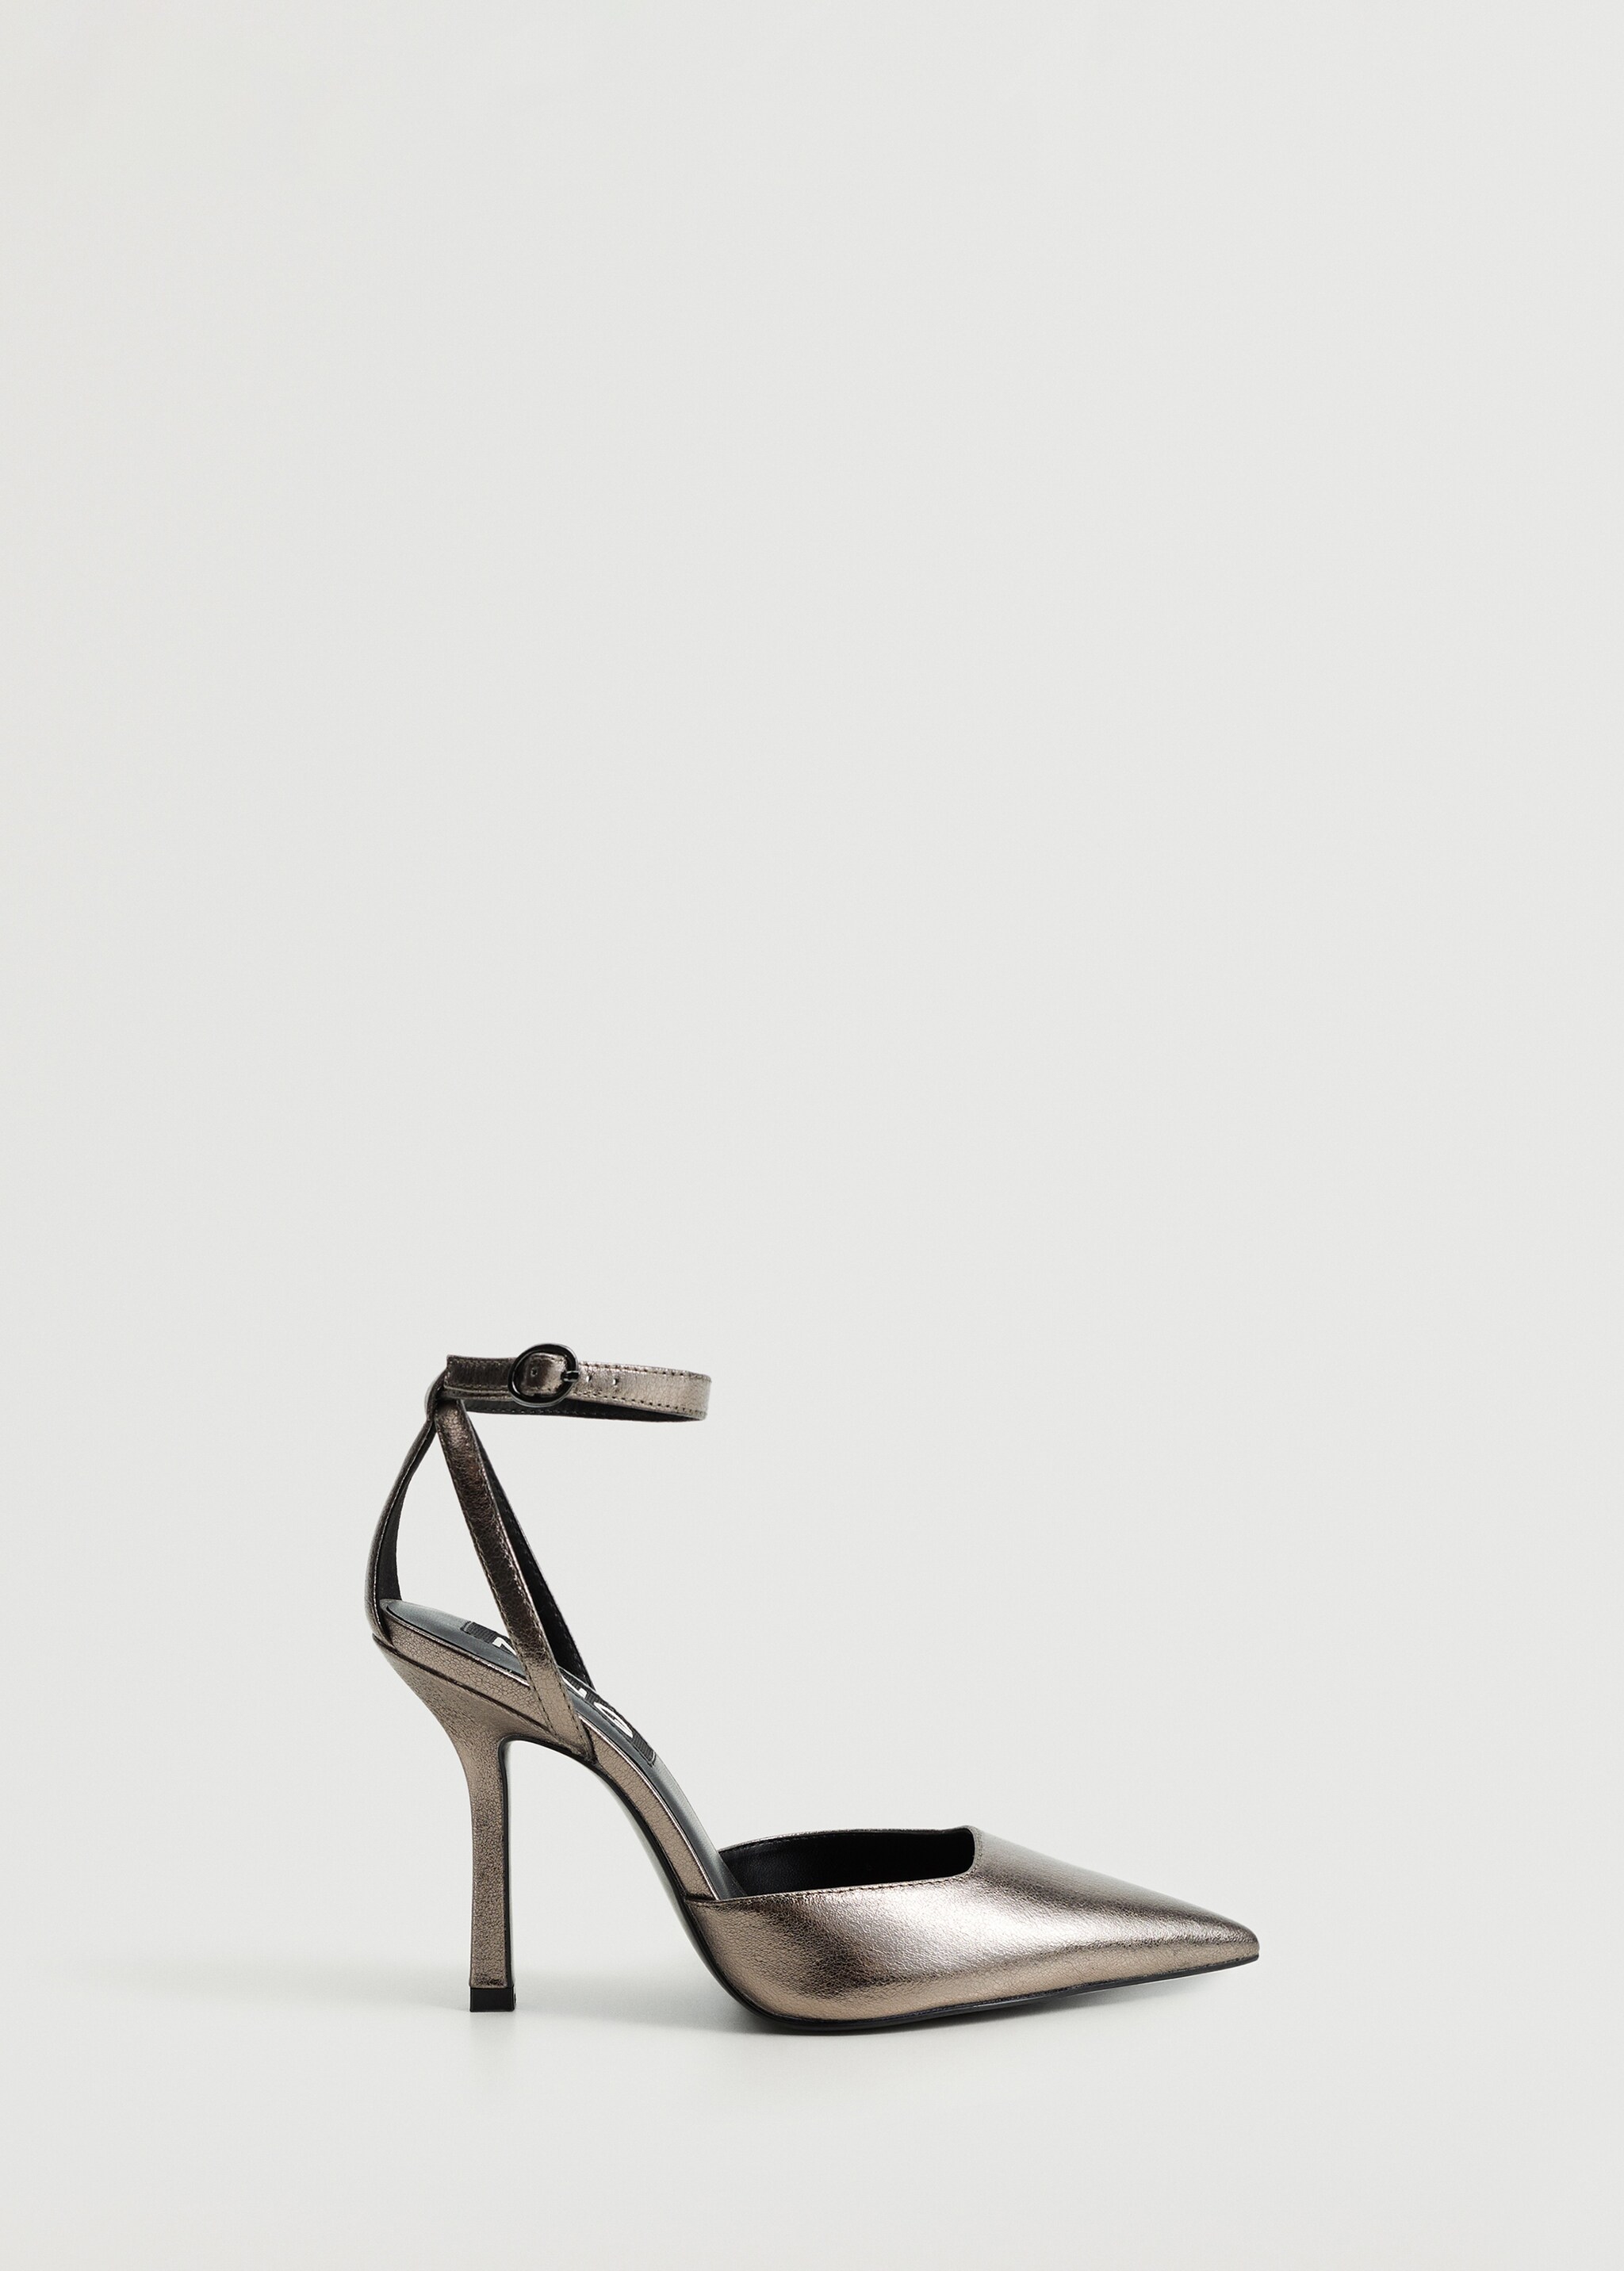 Ankle-cuff pointed toe shoes - Article without model